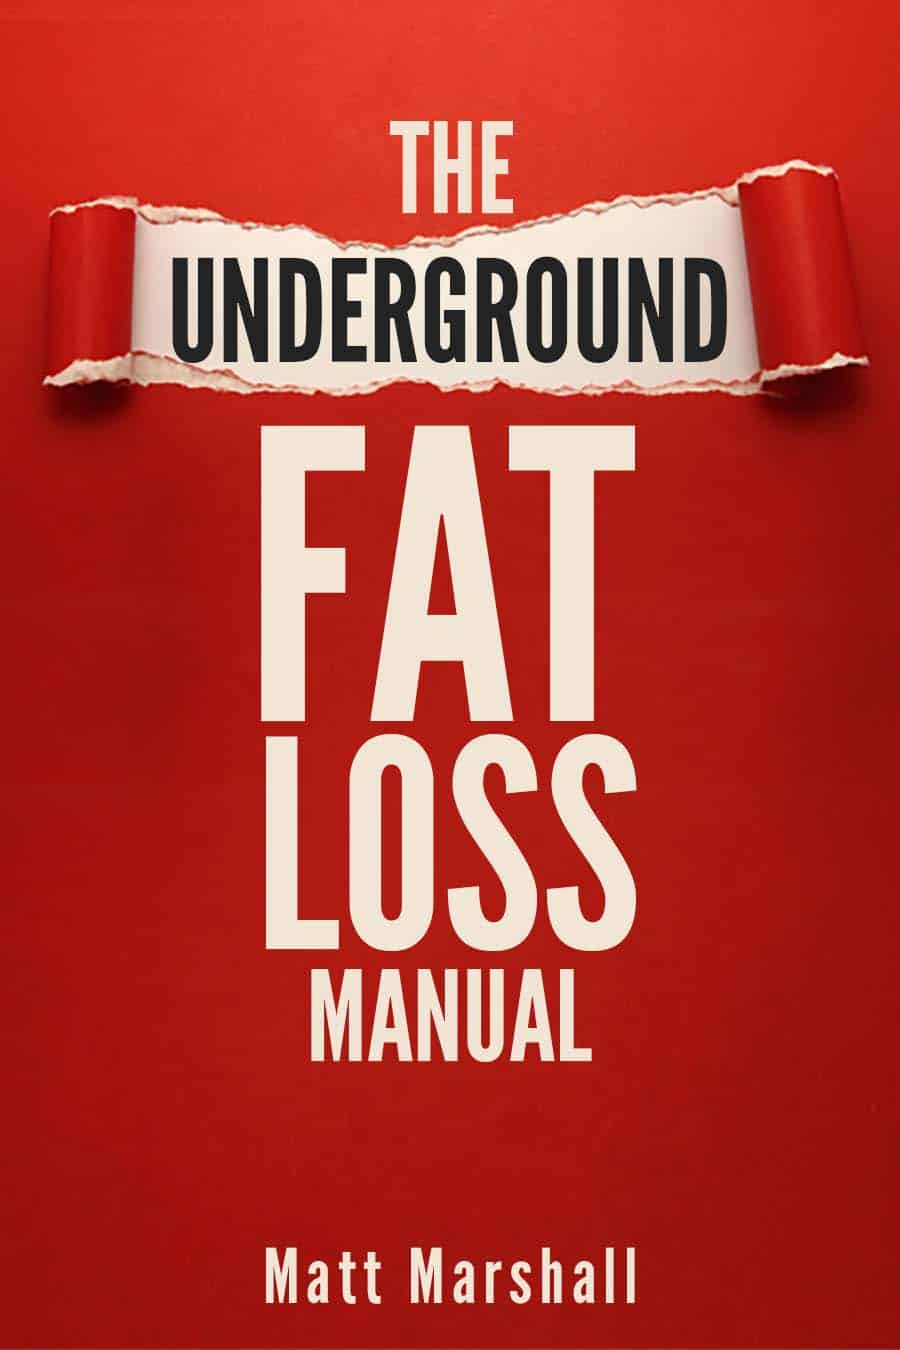 The Underground Fat Loss Manual at a glance